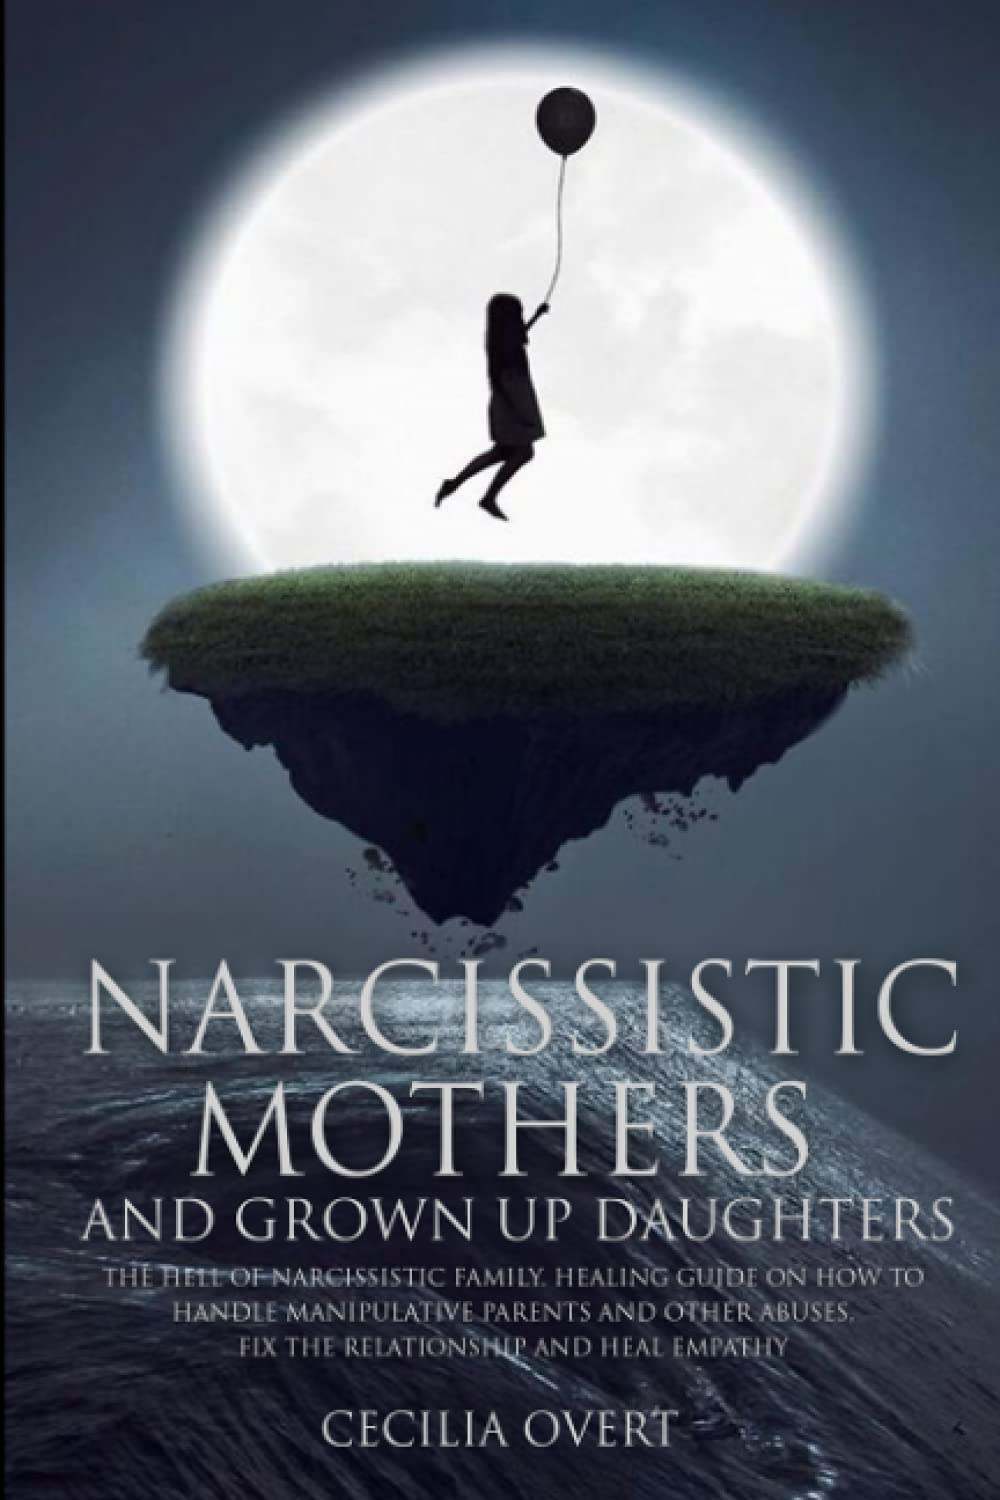 Narcissistic Mothers and Grown Up Daughters